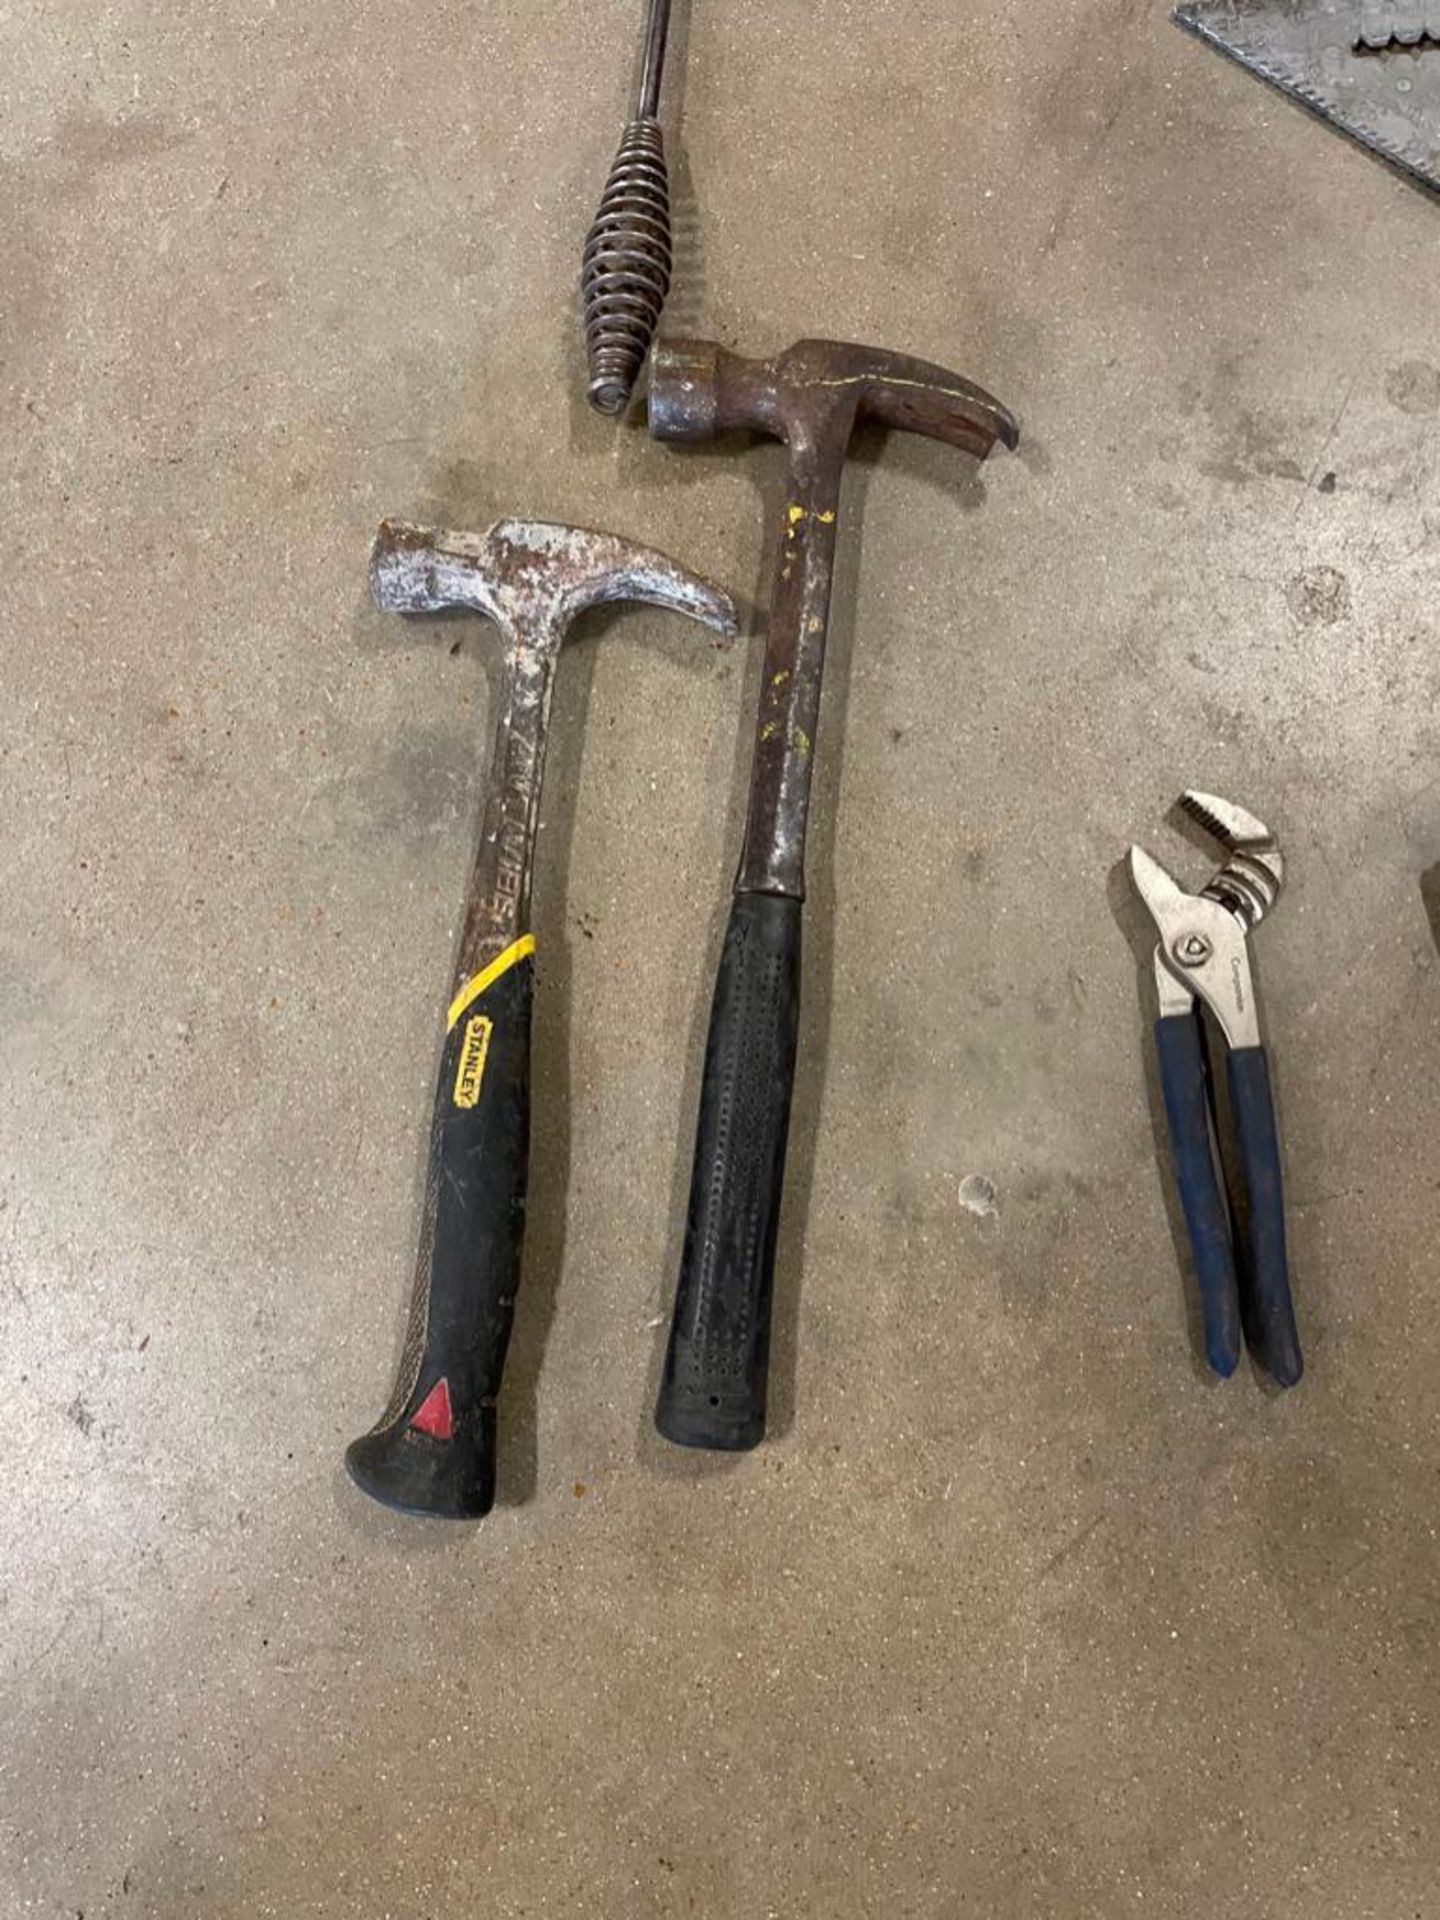 Miscellaneous Tools, Hammers, Level, Squares, etc. Located in Hazelwood, MO - Image 2 of 5